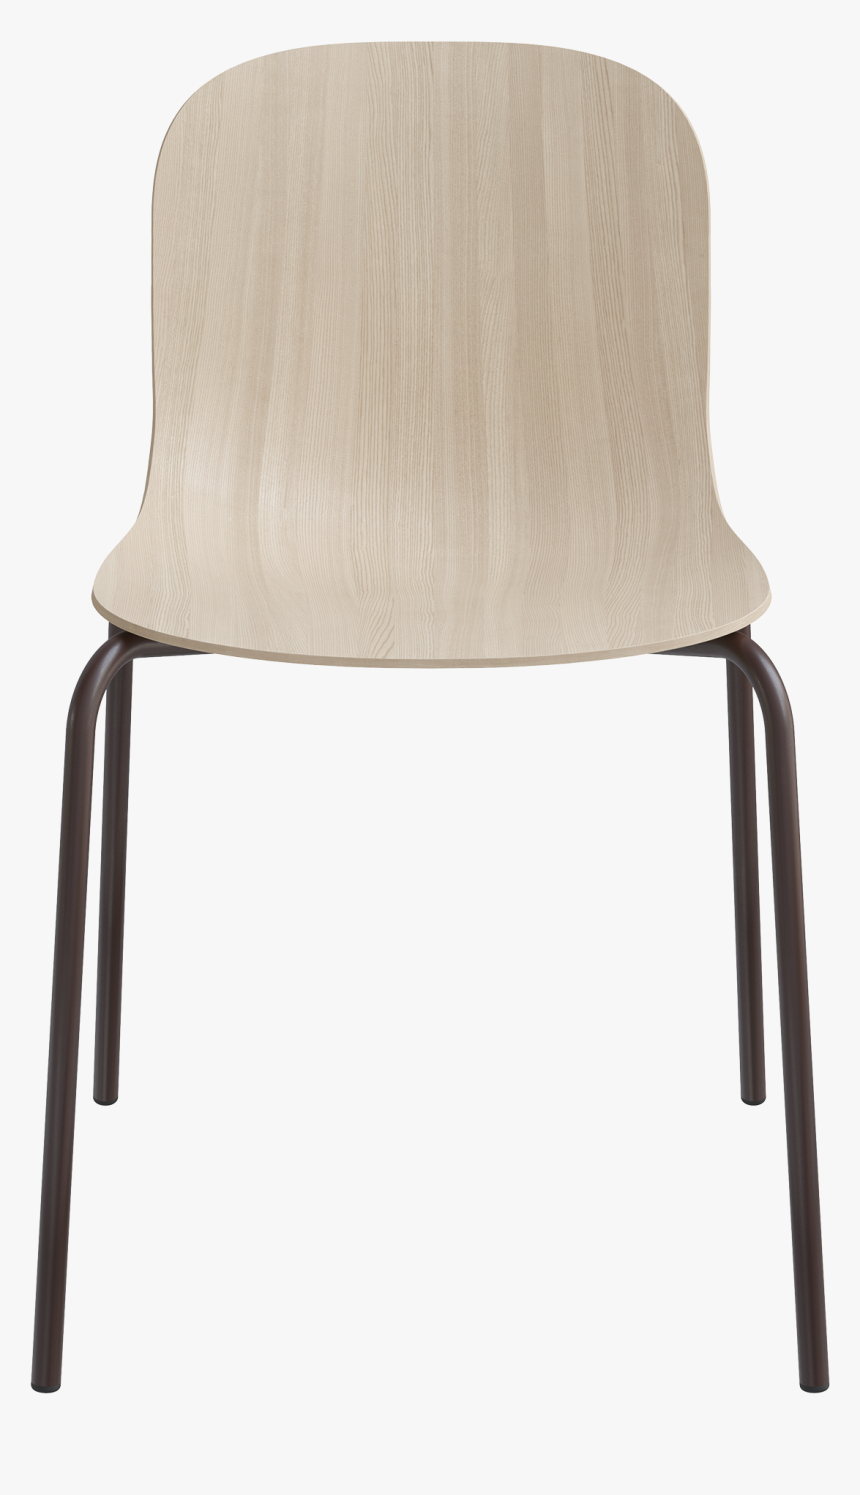 Chair Png Image, Transparent Png, Free Download